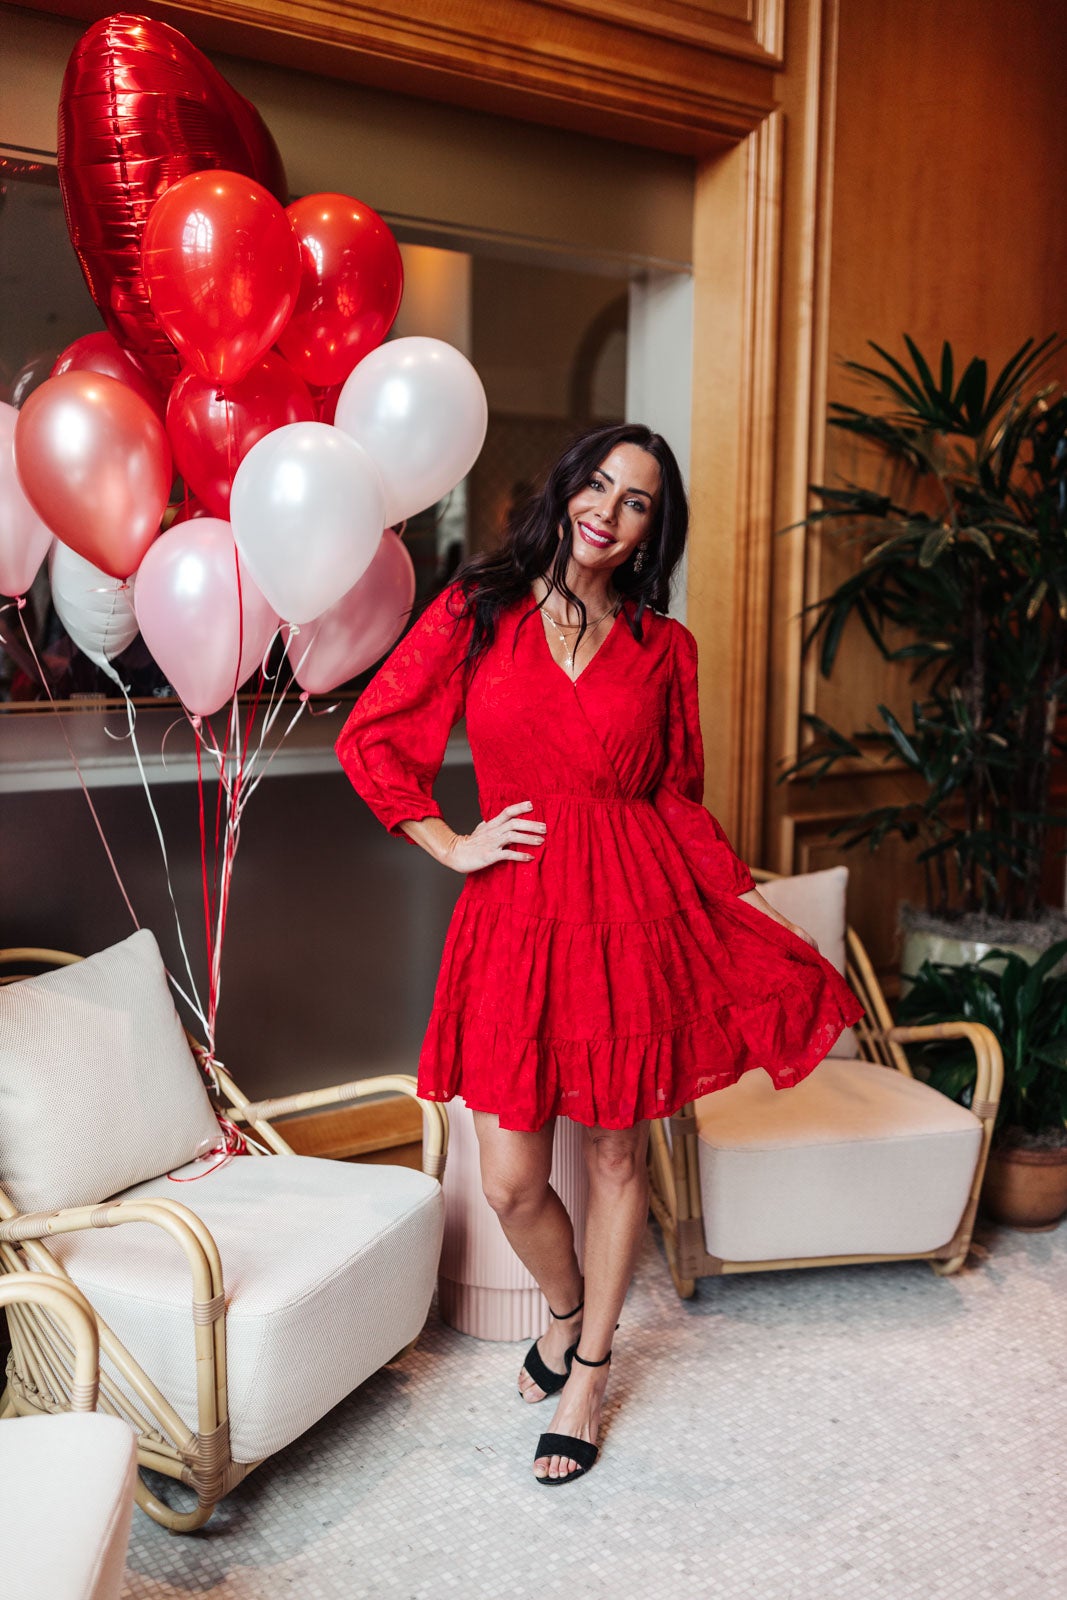 Sweetheart's Dress in Red (Online Exclusive)